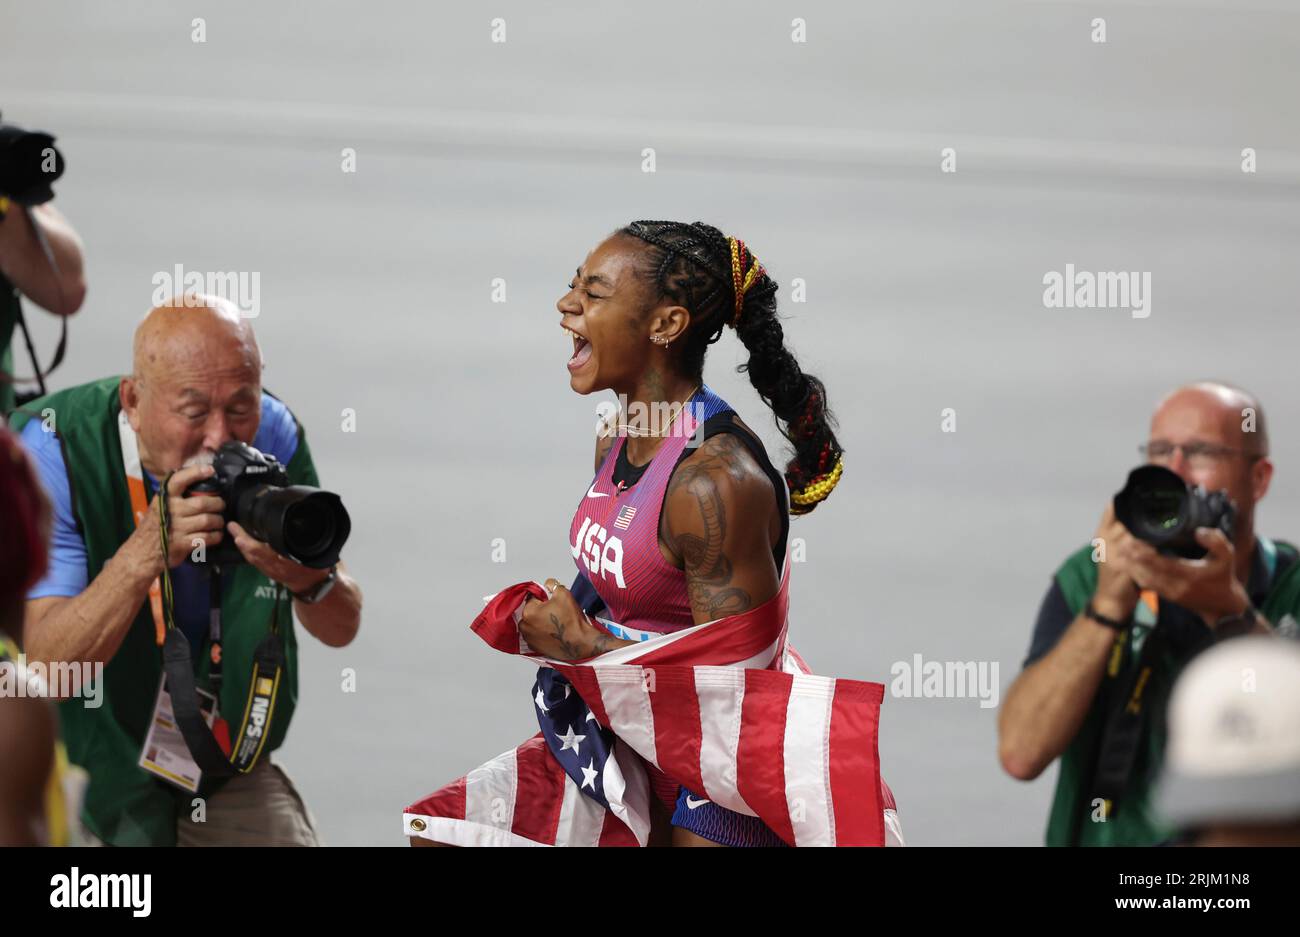 Shacarri Richardson Of United States Of America Reacts After Winning Womens 100 Meters Final Of The World Athletics Championships In Budapest Hungary On Aug 21 2023 Richardson Won With The Meet Record To Claim The Gold Medal The Yomiuri Shimbun Via Ap Images 2RJM1N8 